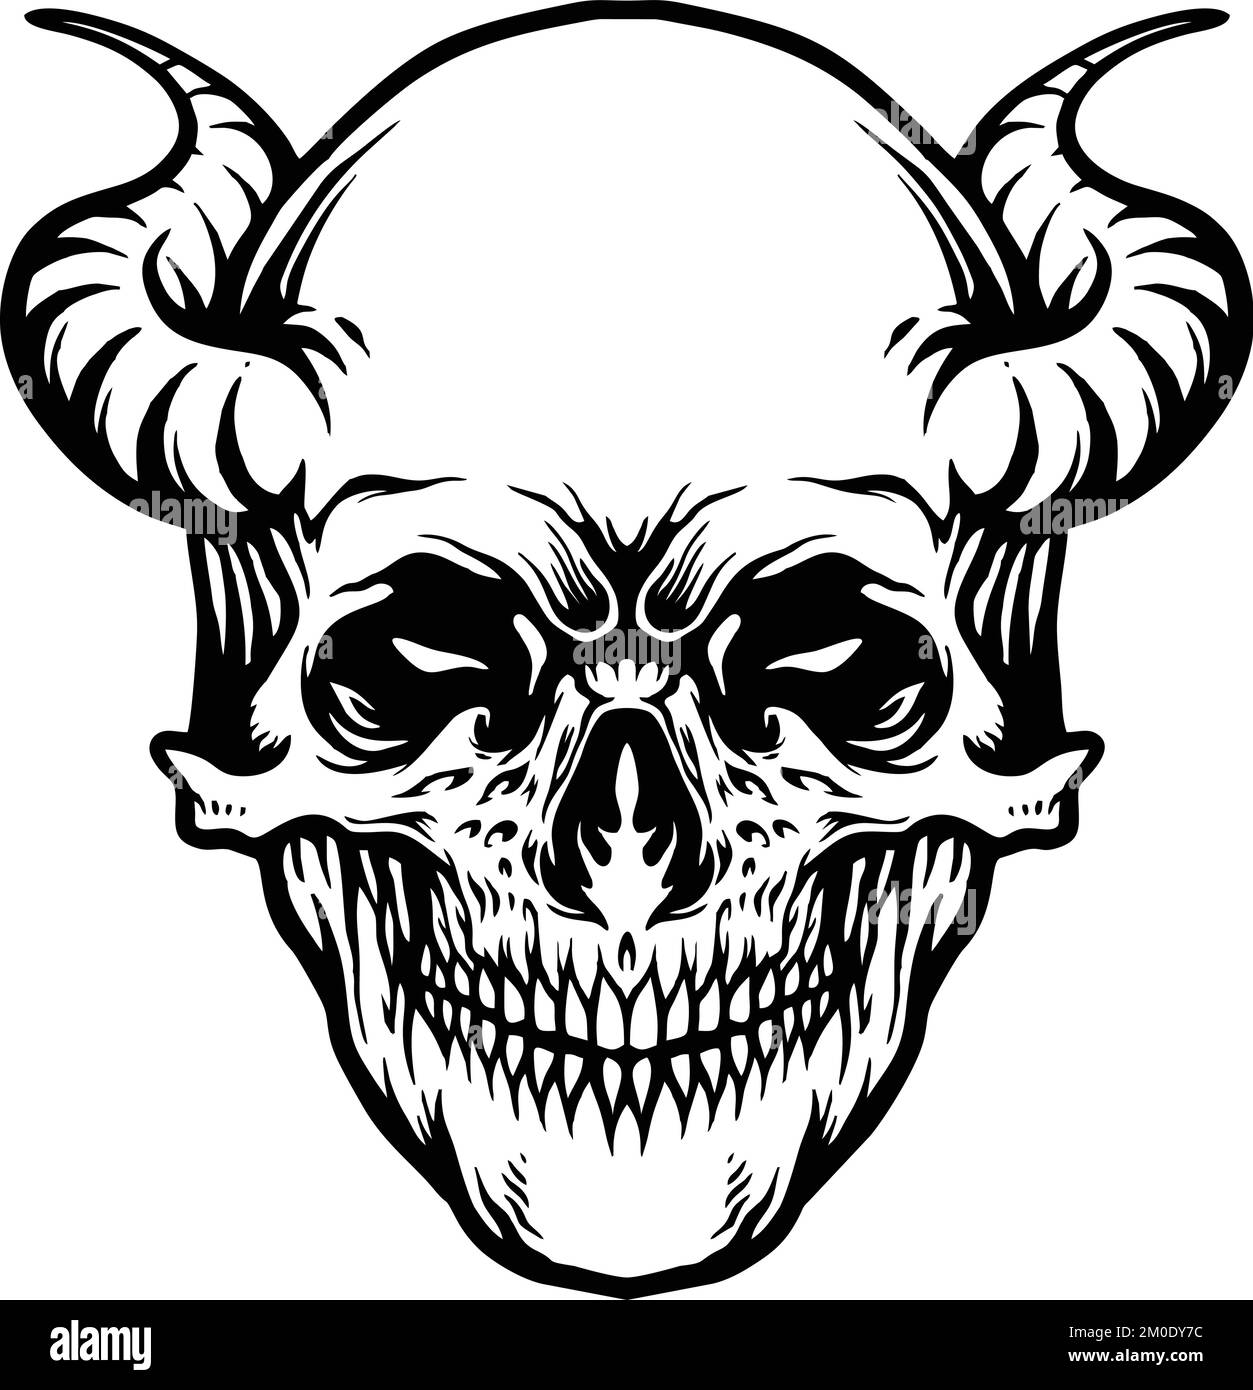 Tattoo Demon Skull Horn monochrome vector illustrations for your work logo, merchandise t-shirt, stickers and label designs, poster, greeting cards Stock Vector